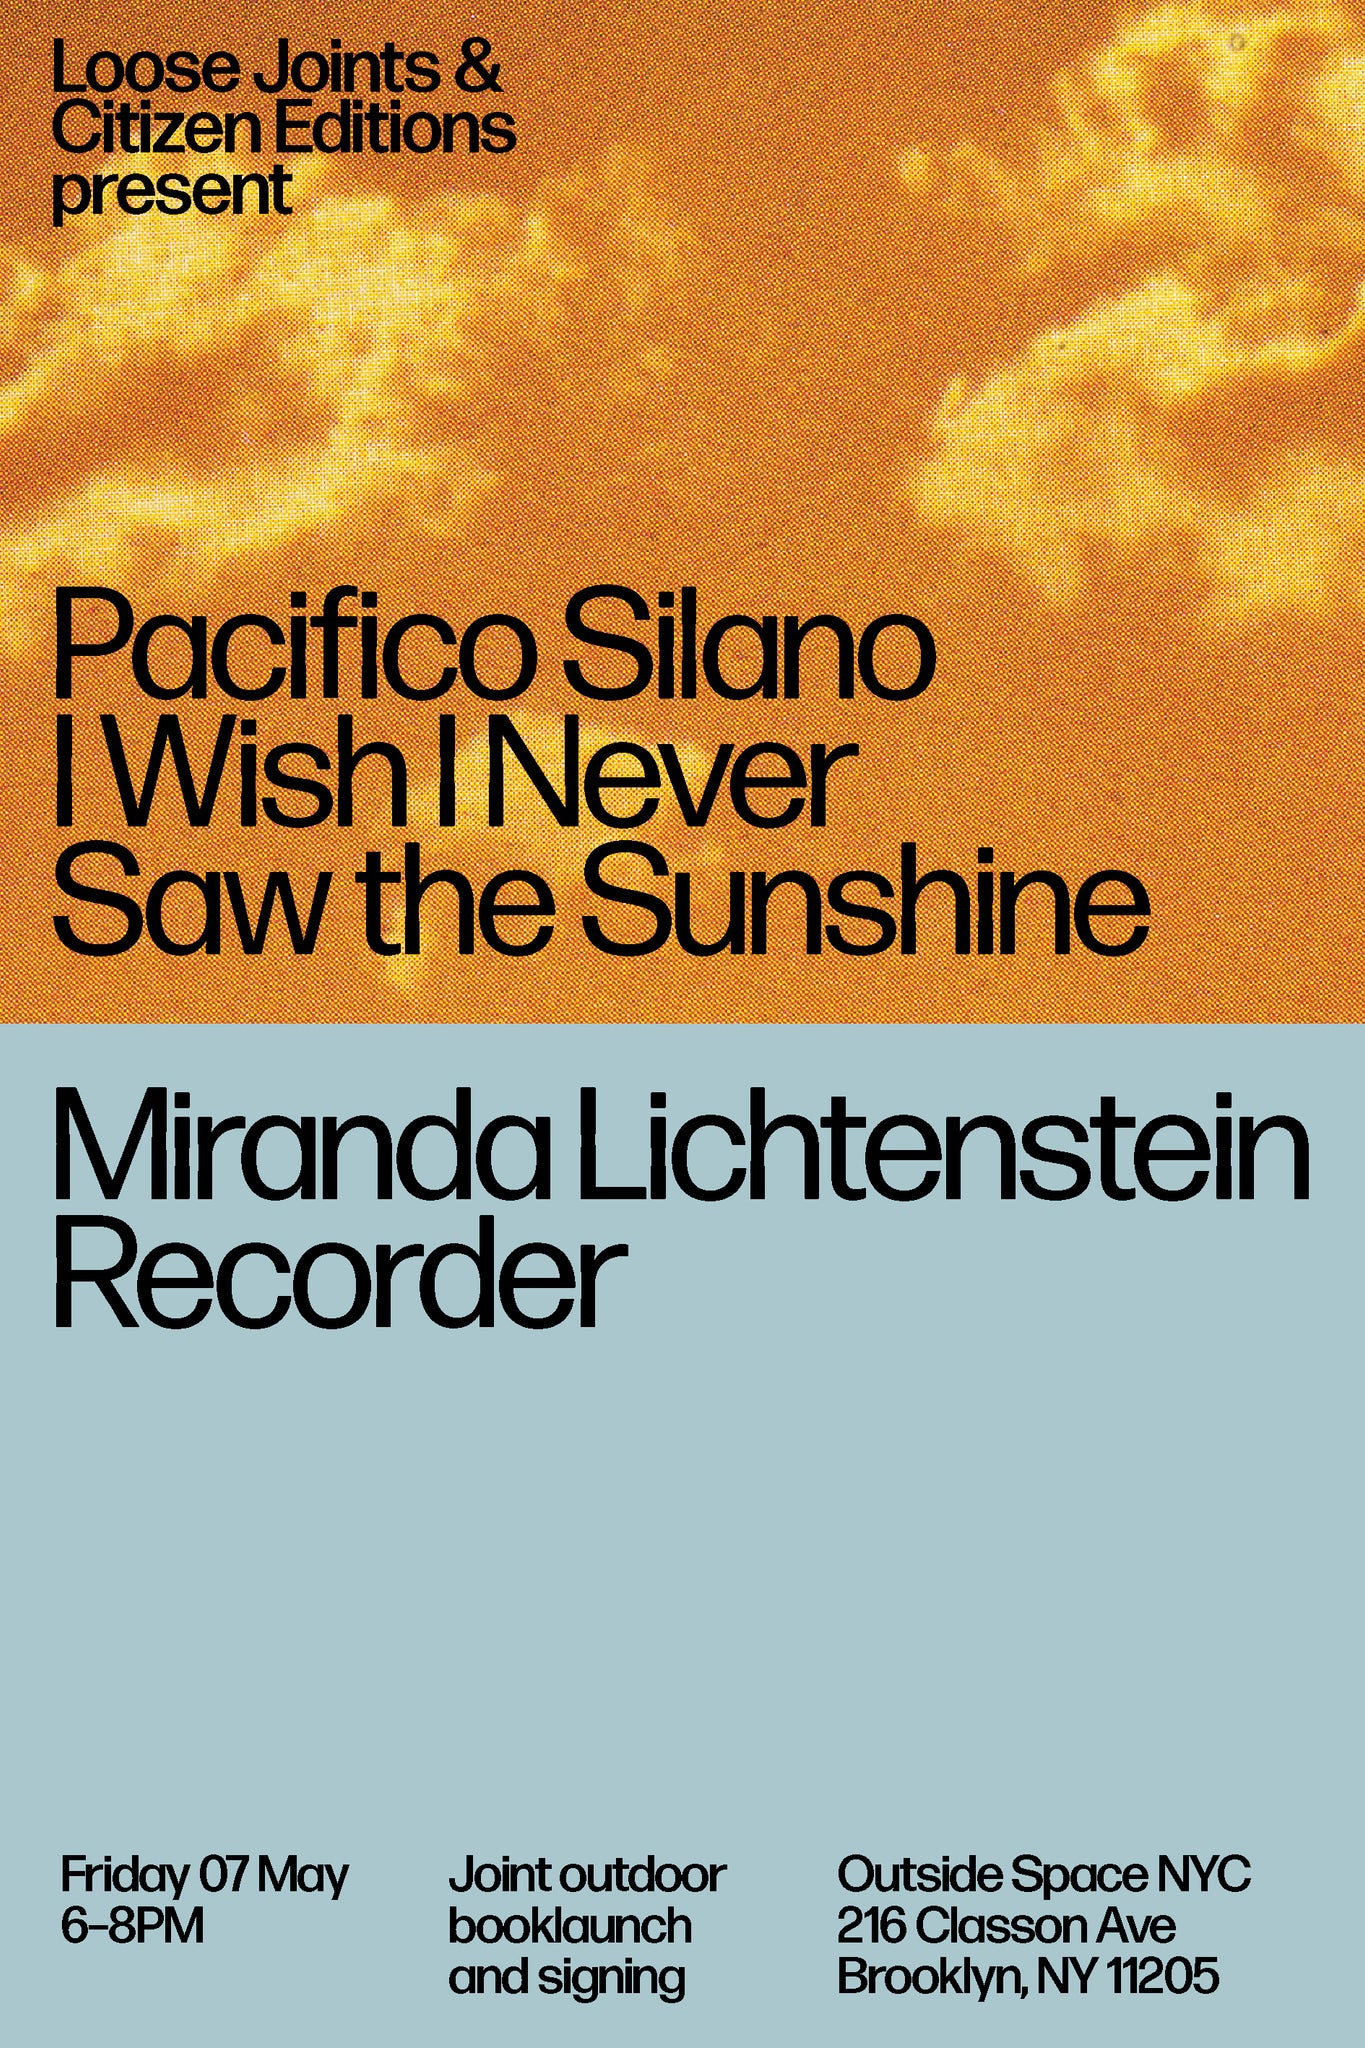 Joint outdoor booklaunch and signing with Miranda Lichtenstein & Pacifico Silano